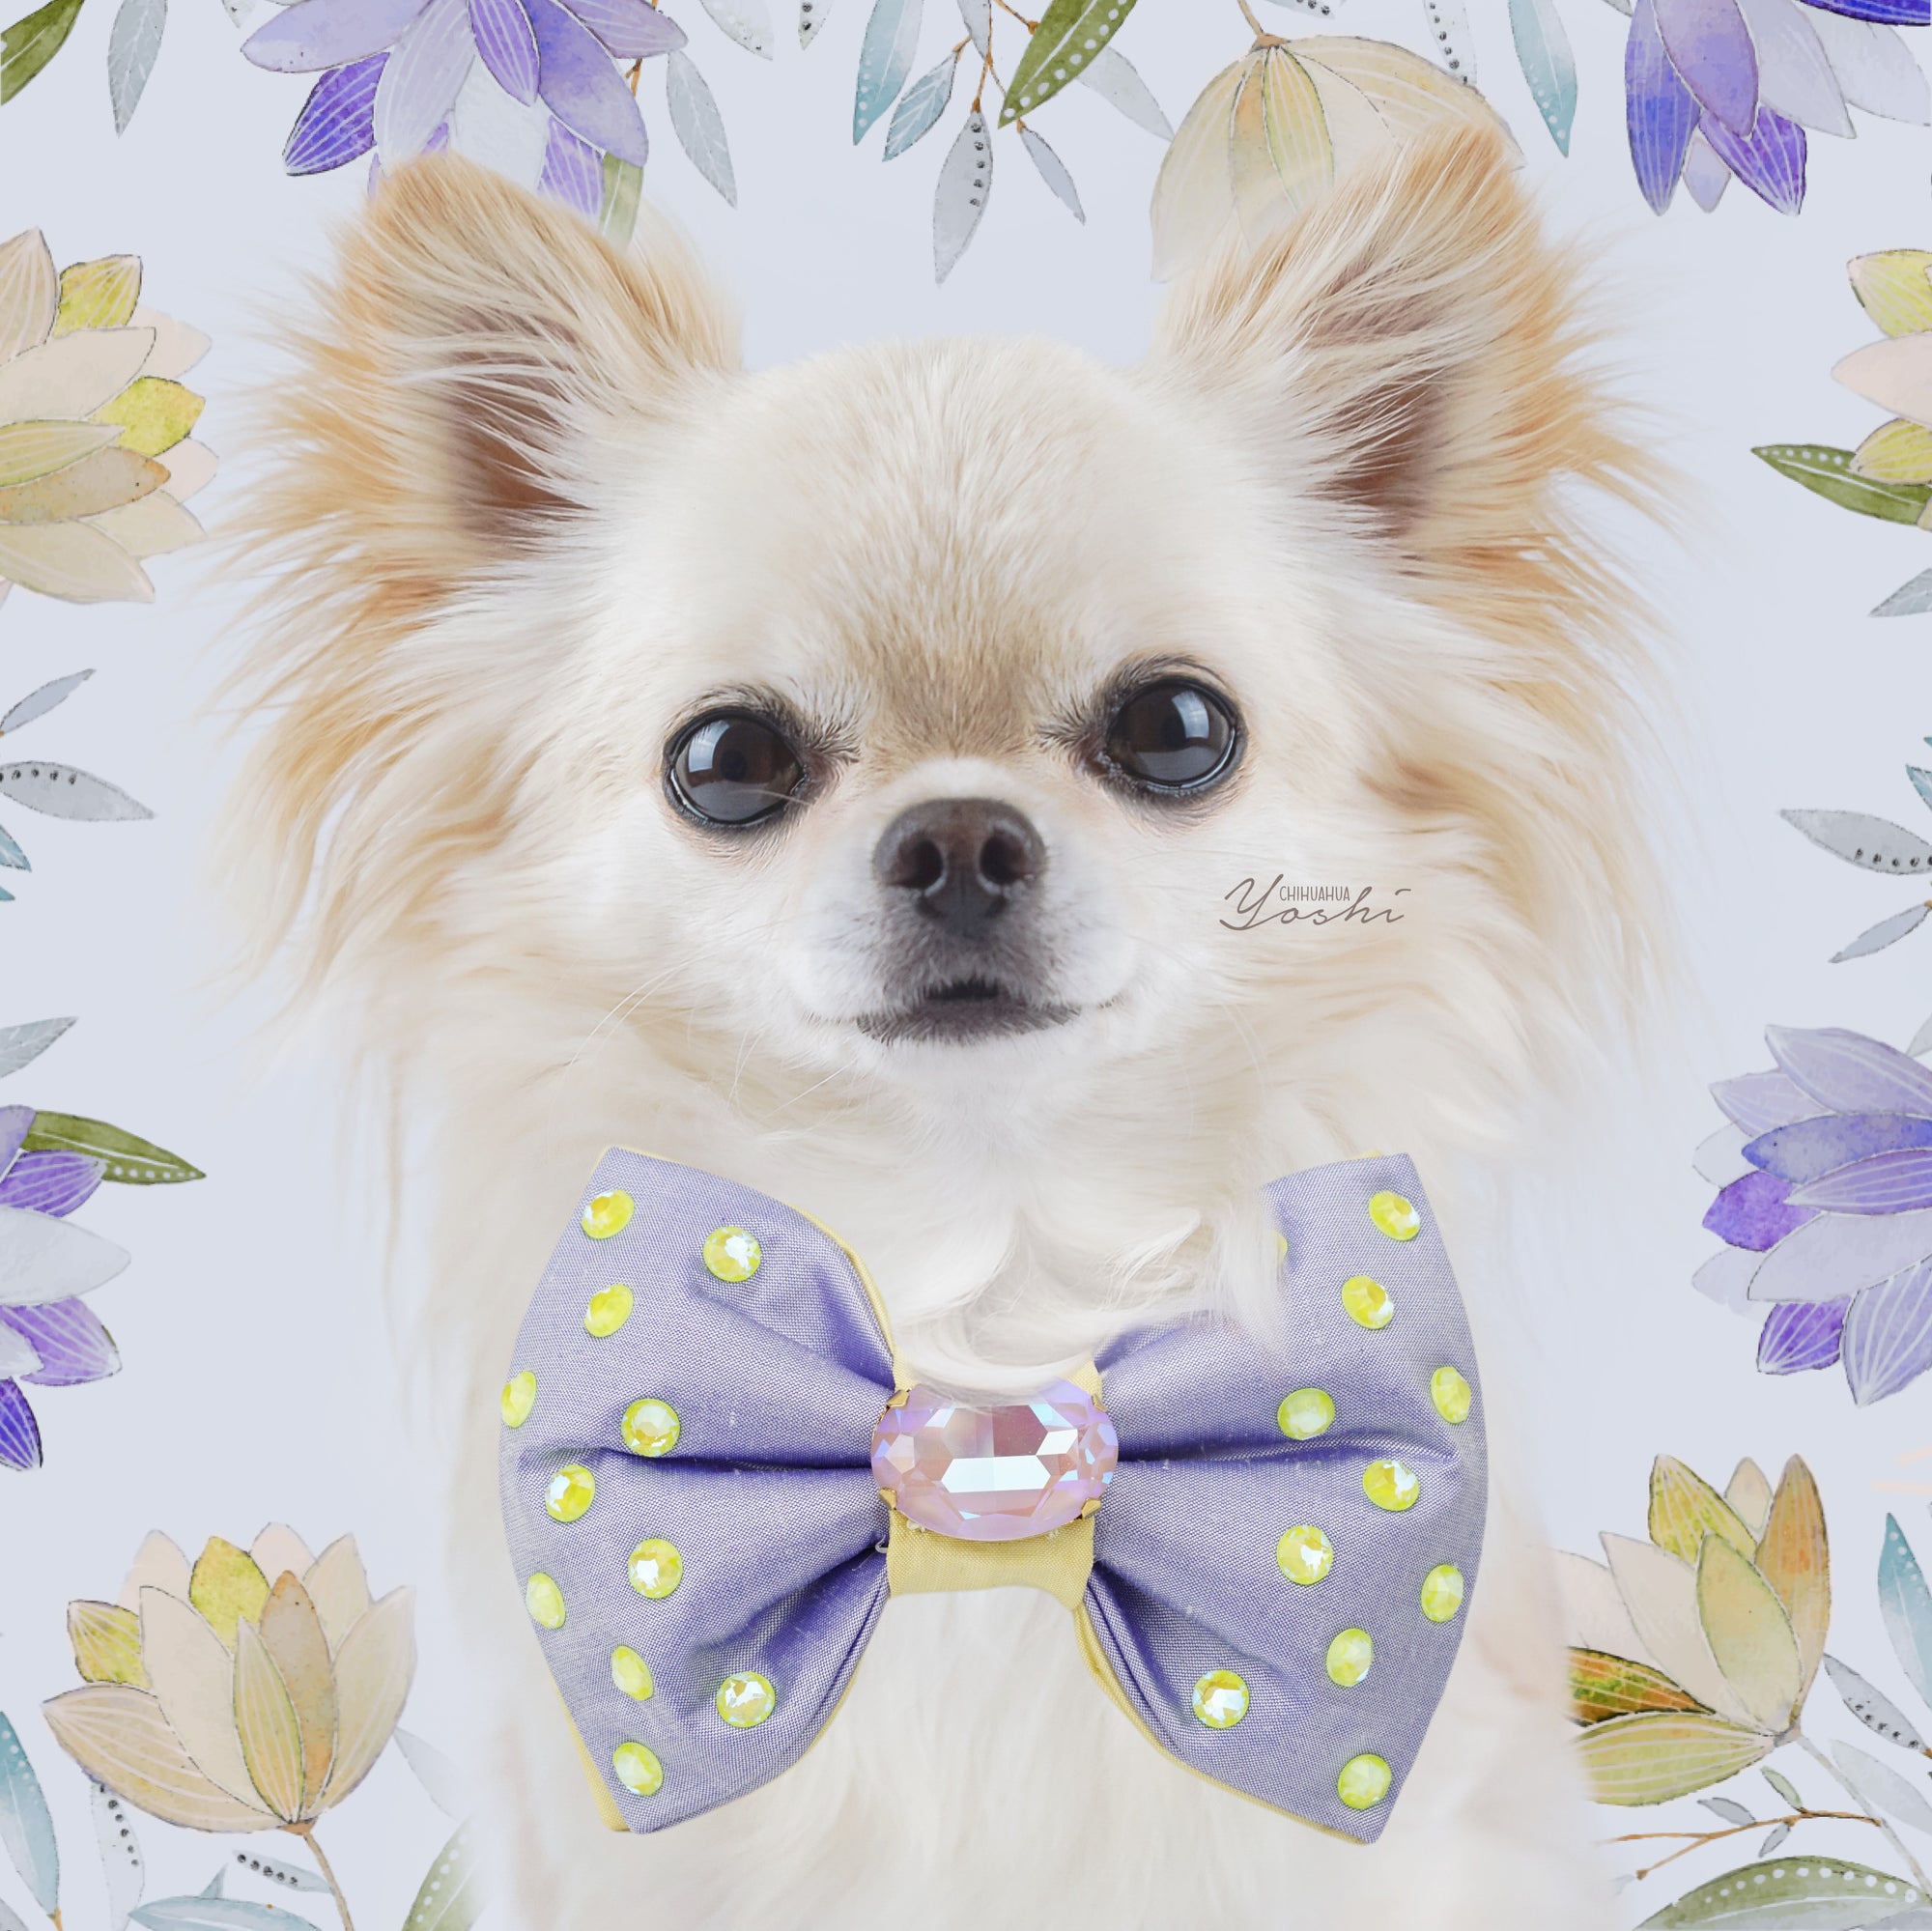 Primroses and Violets | Silk Reversible Bow Tie | Large | Fancy Cut Oval Crystal